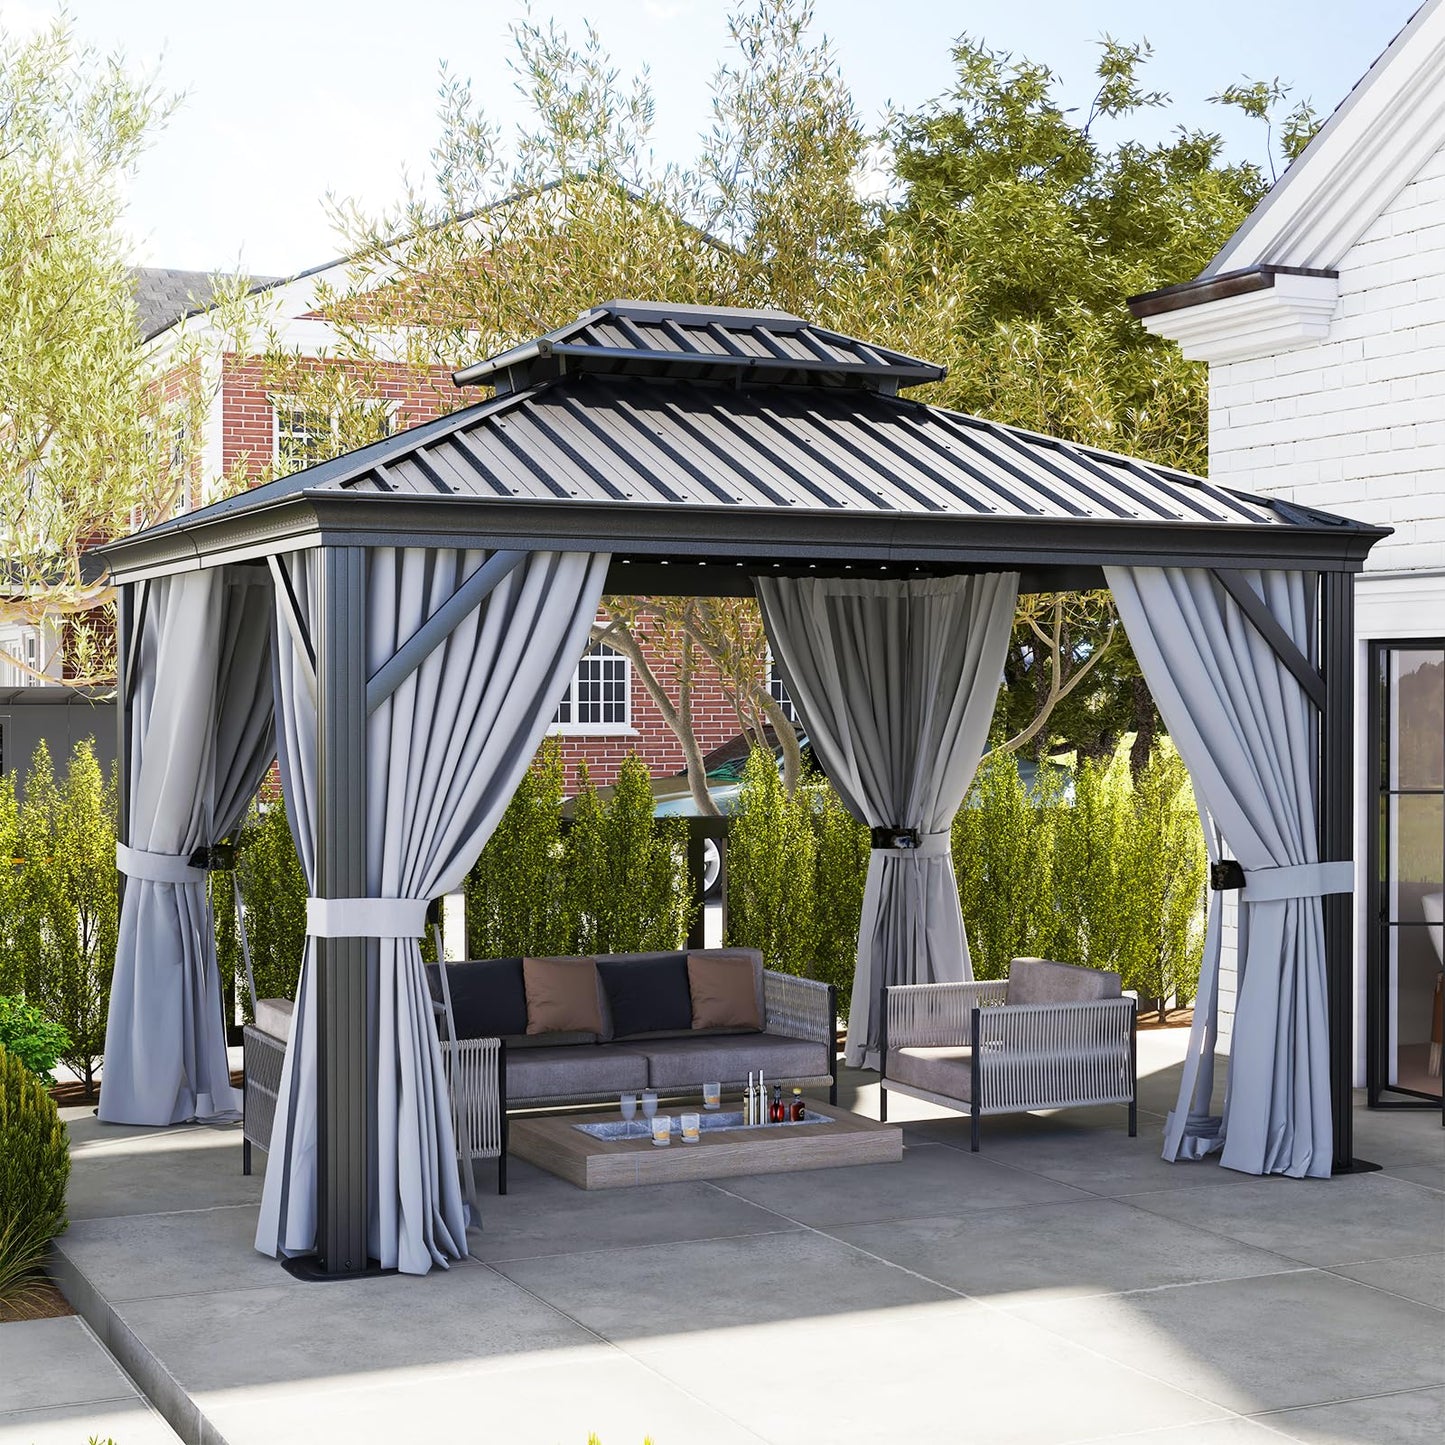 Aoxun 10' x 12' Hardtop Gazebo, Galvanized Steel Dual-Layer Roof, Permanent Aluminum Gazebo, Outdoor Metal Pergolas with Curtains and Netting, for Lawns, Parties, Gardens, Decks, Patios